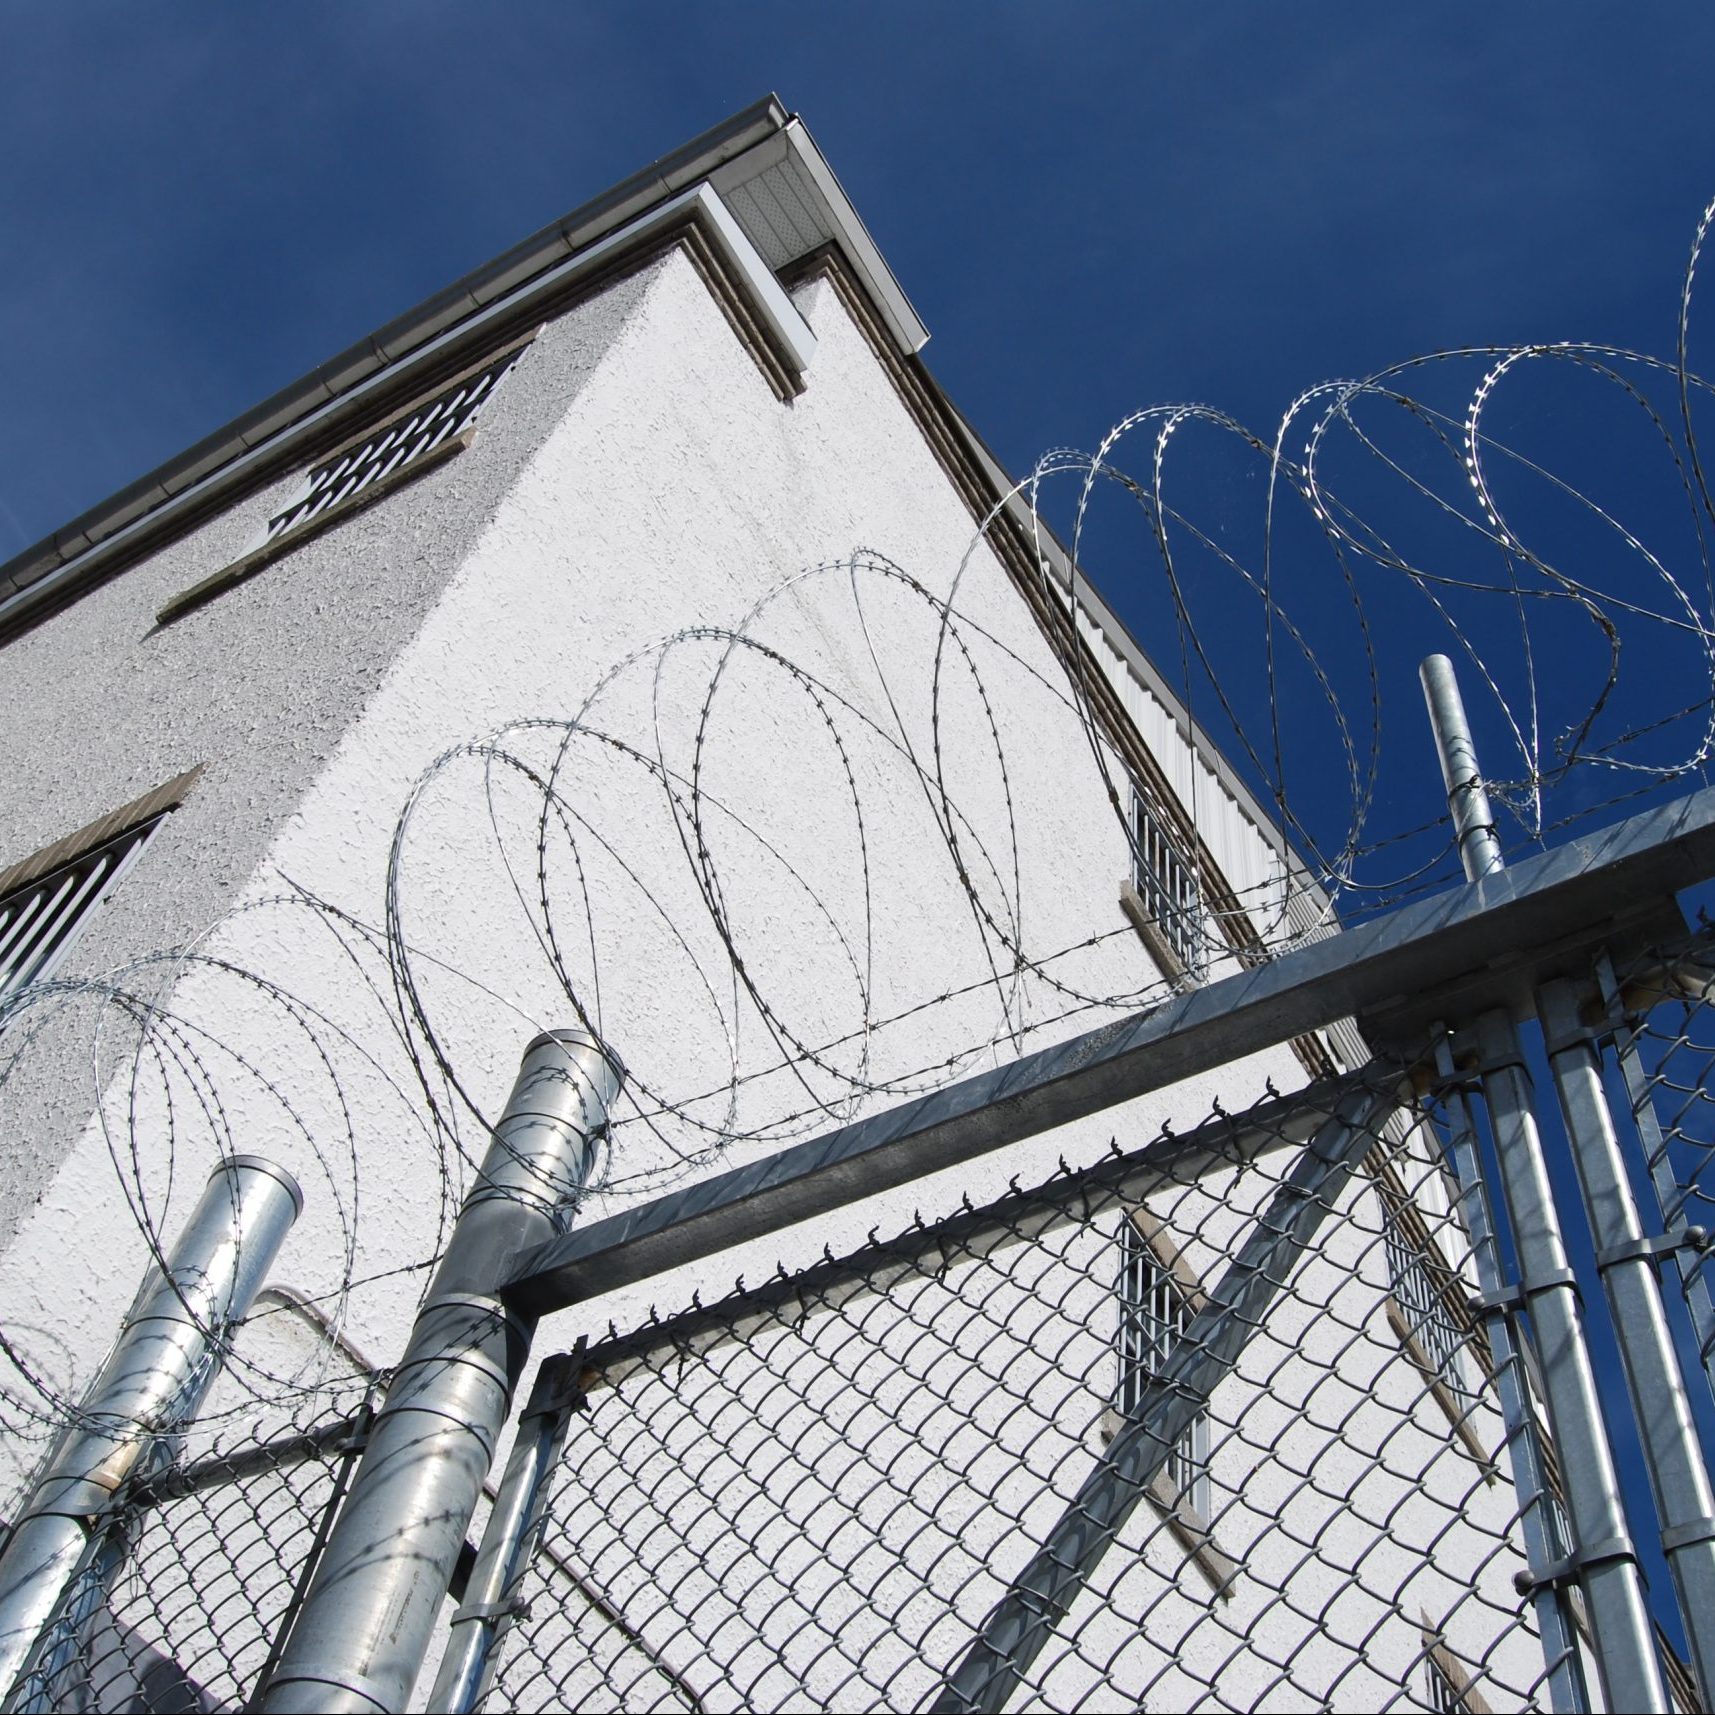 Prison building with barbed wire and fence